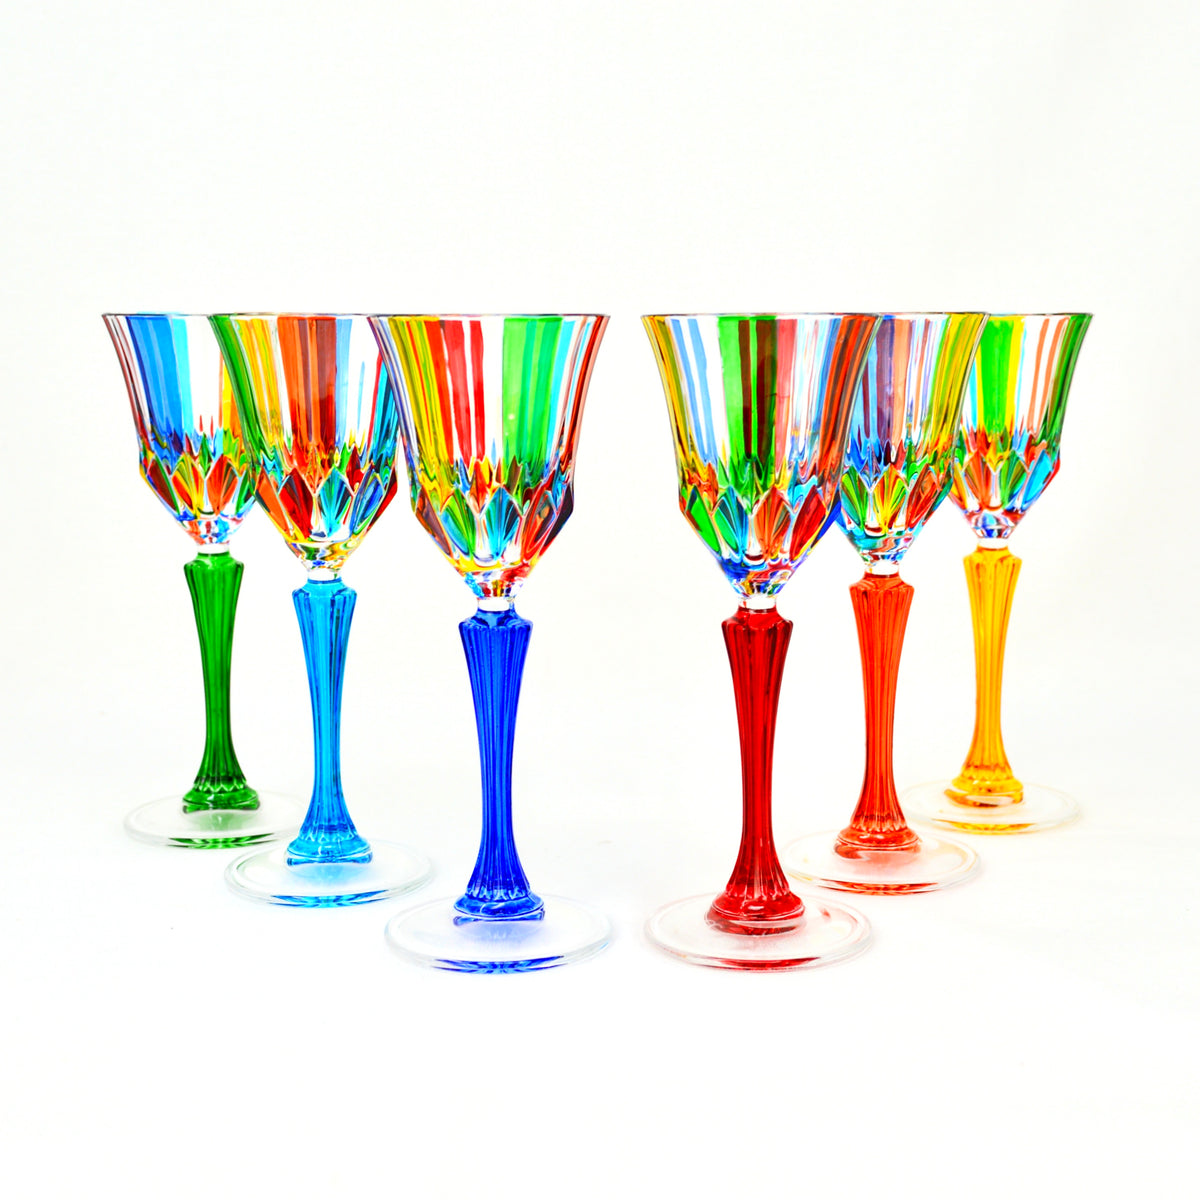 Swatch Cordial Glasses, Hand-Painted Italian Crystal, Set of 6 - My Italian Decor